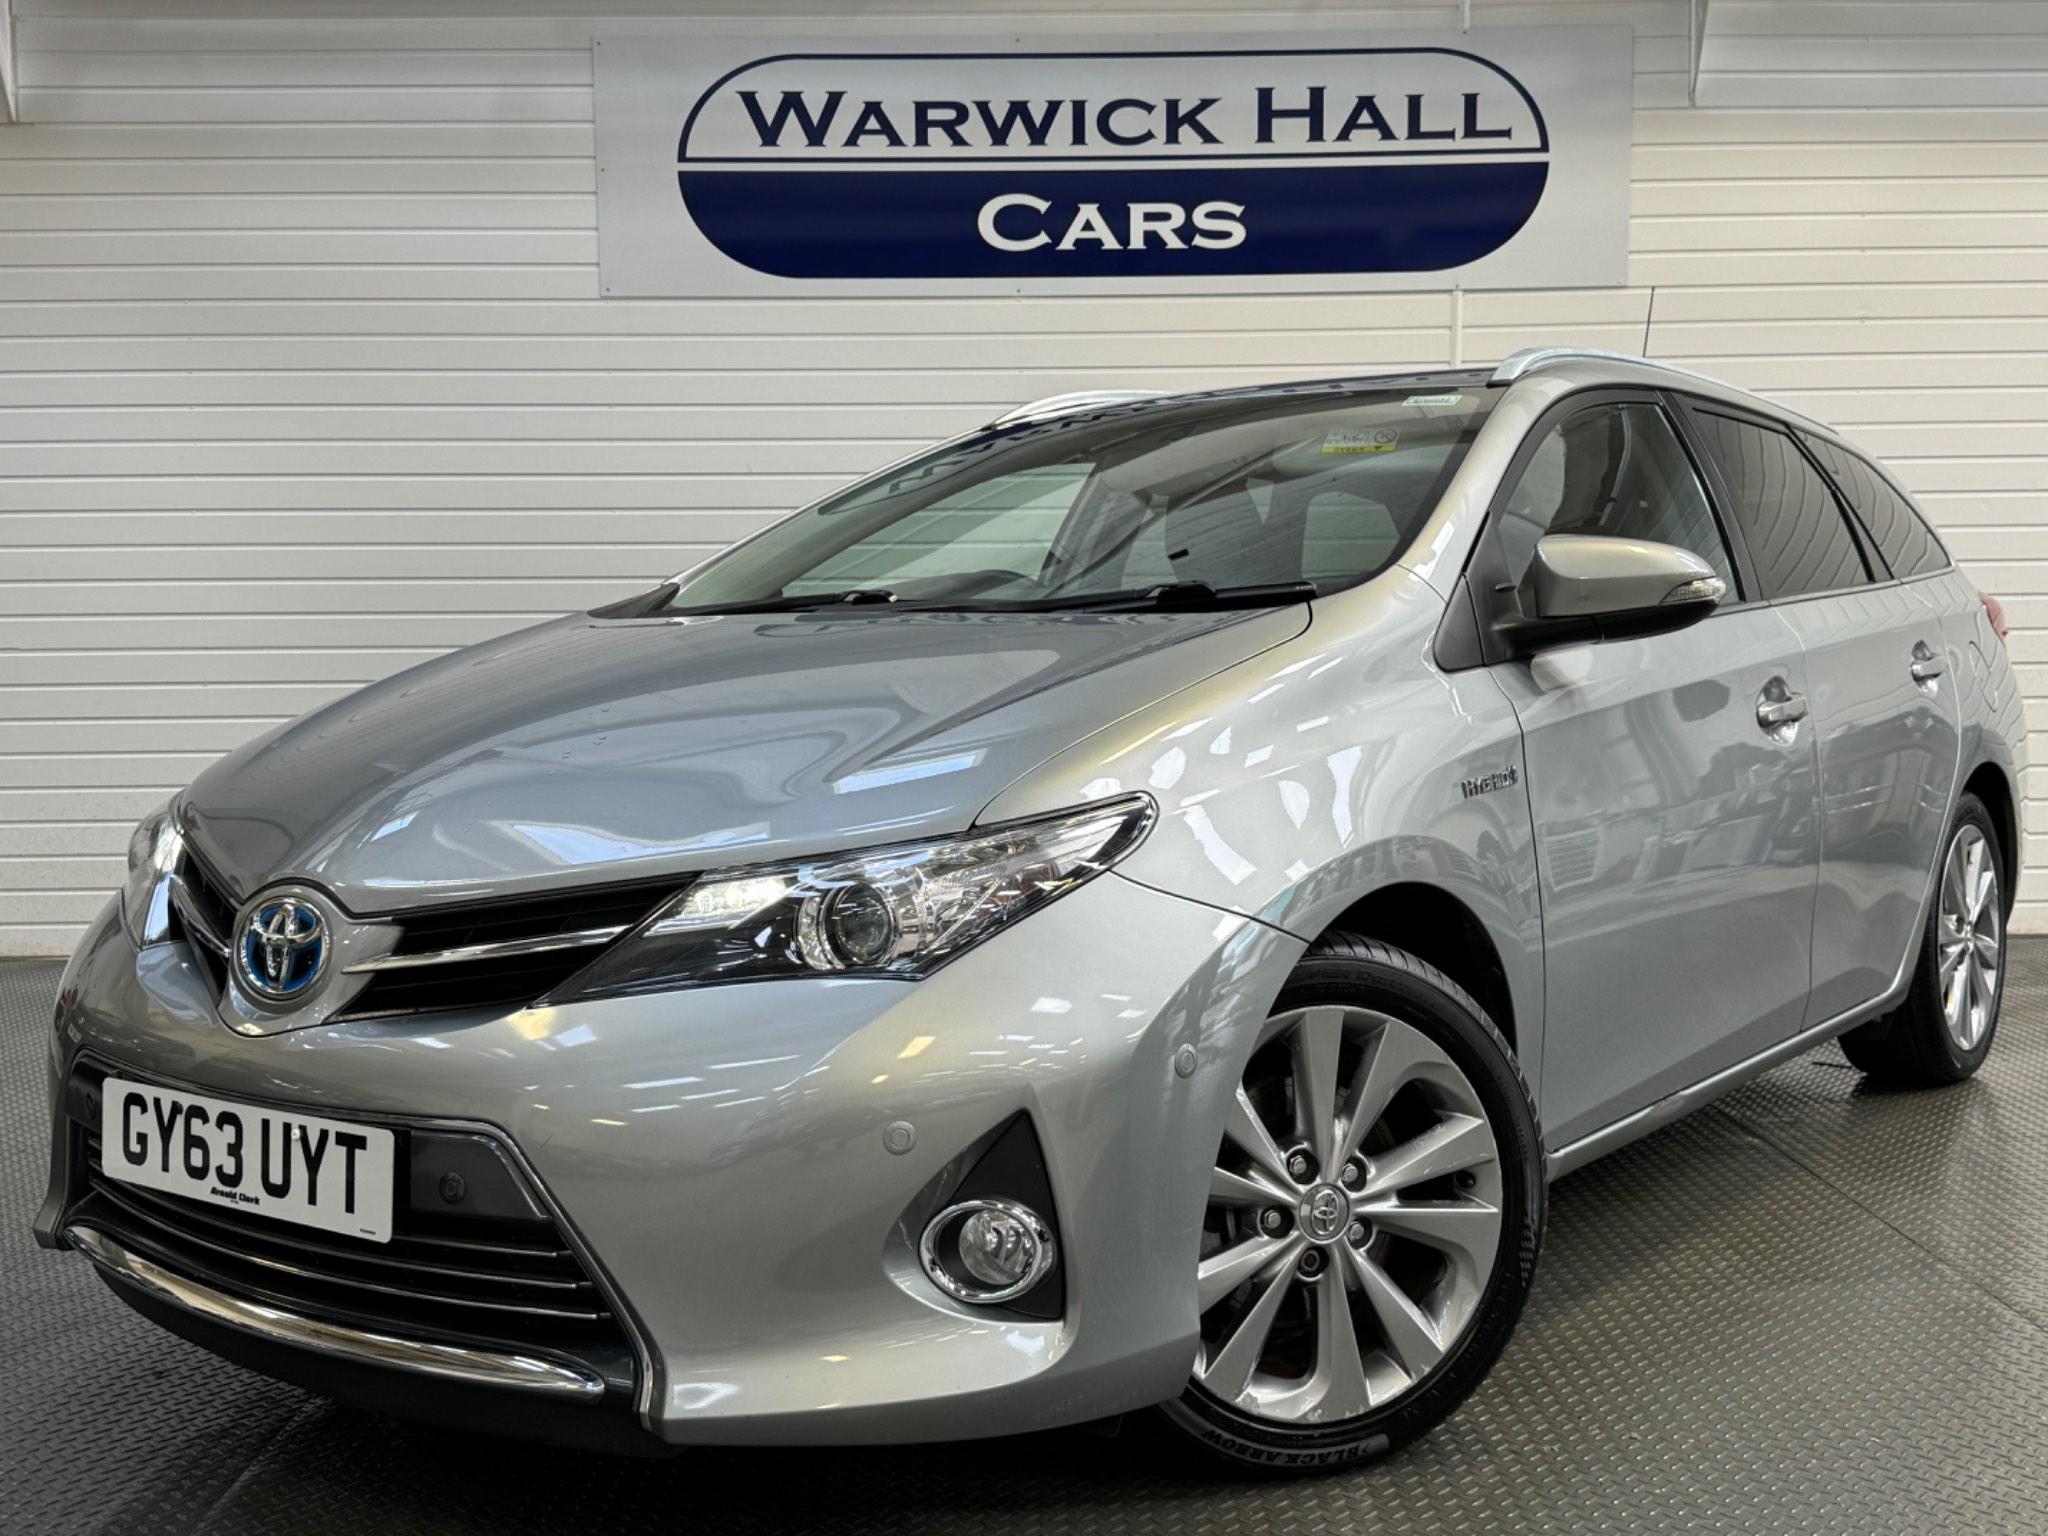 For Sale Toyota Auris 1.8 VVT-h Excel Touring Sports CVT Euro 5 (s/s) 5dr in Greater Manchester